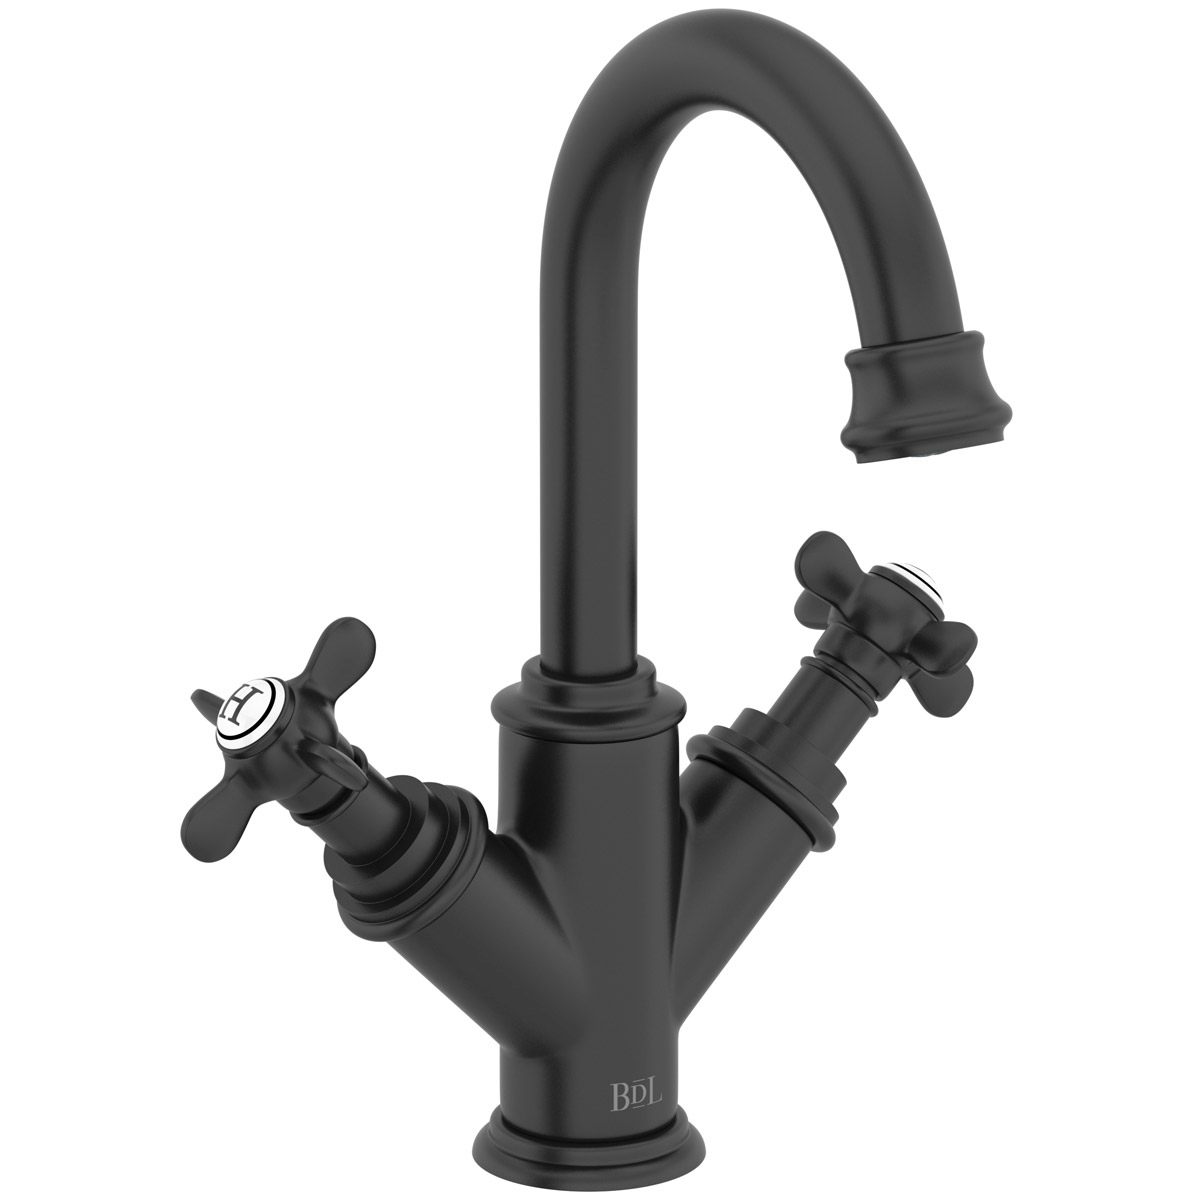 The Bath Co. Castello basin mixer tap with slotted waste